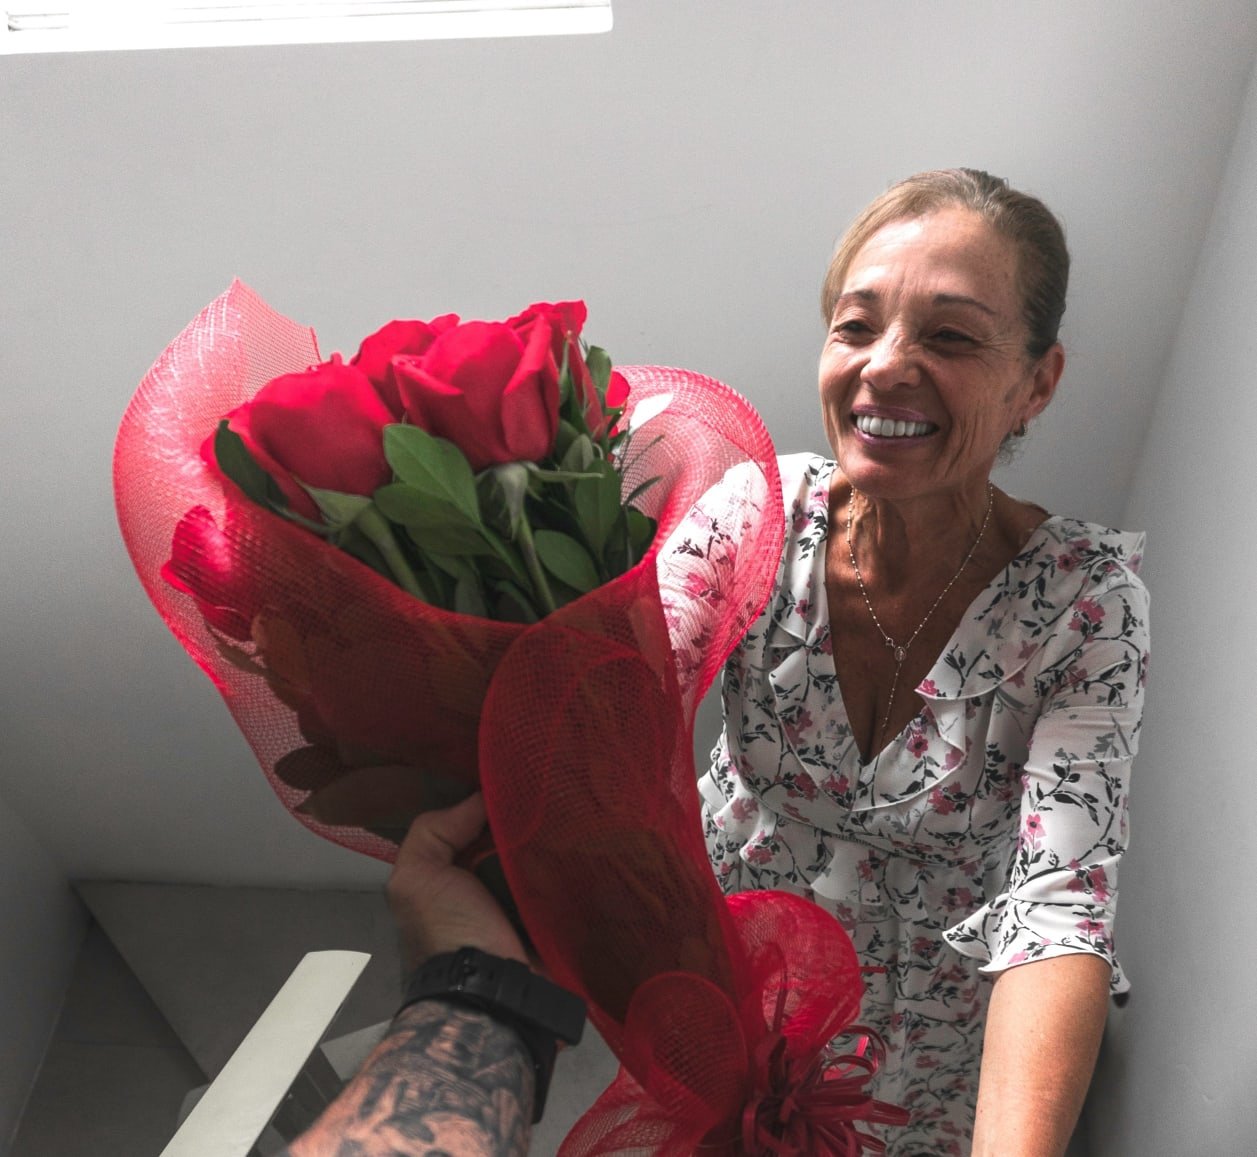 A woman smiles as she receives a large bunch of red flowers